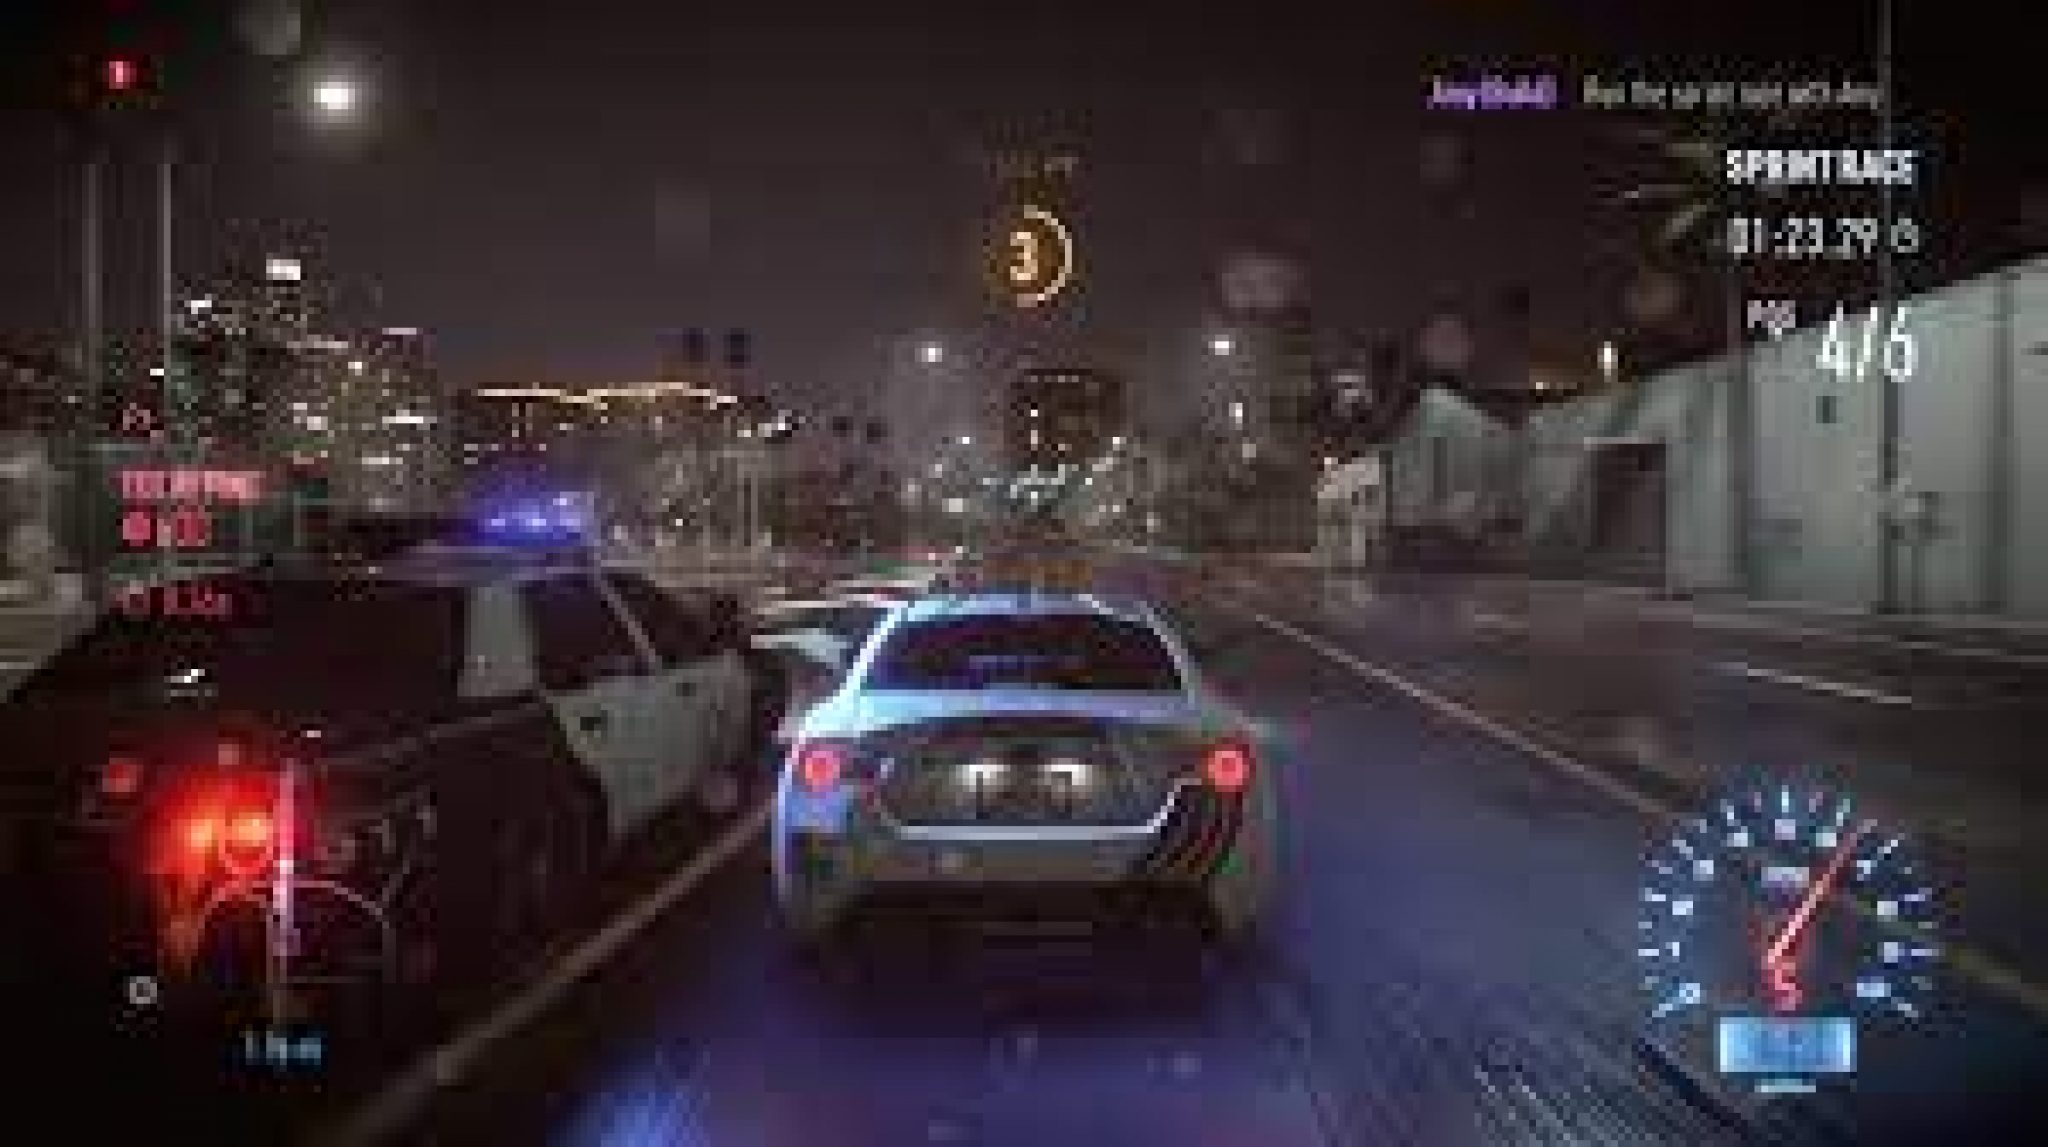 how install need for speed 2015 pc